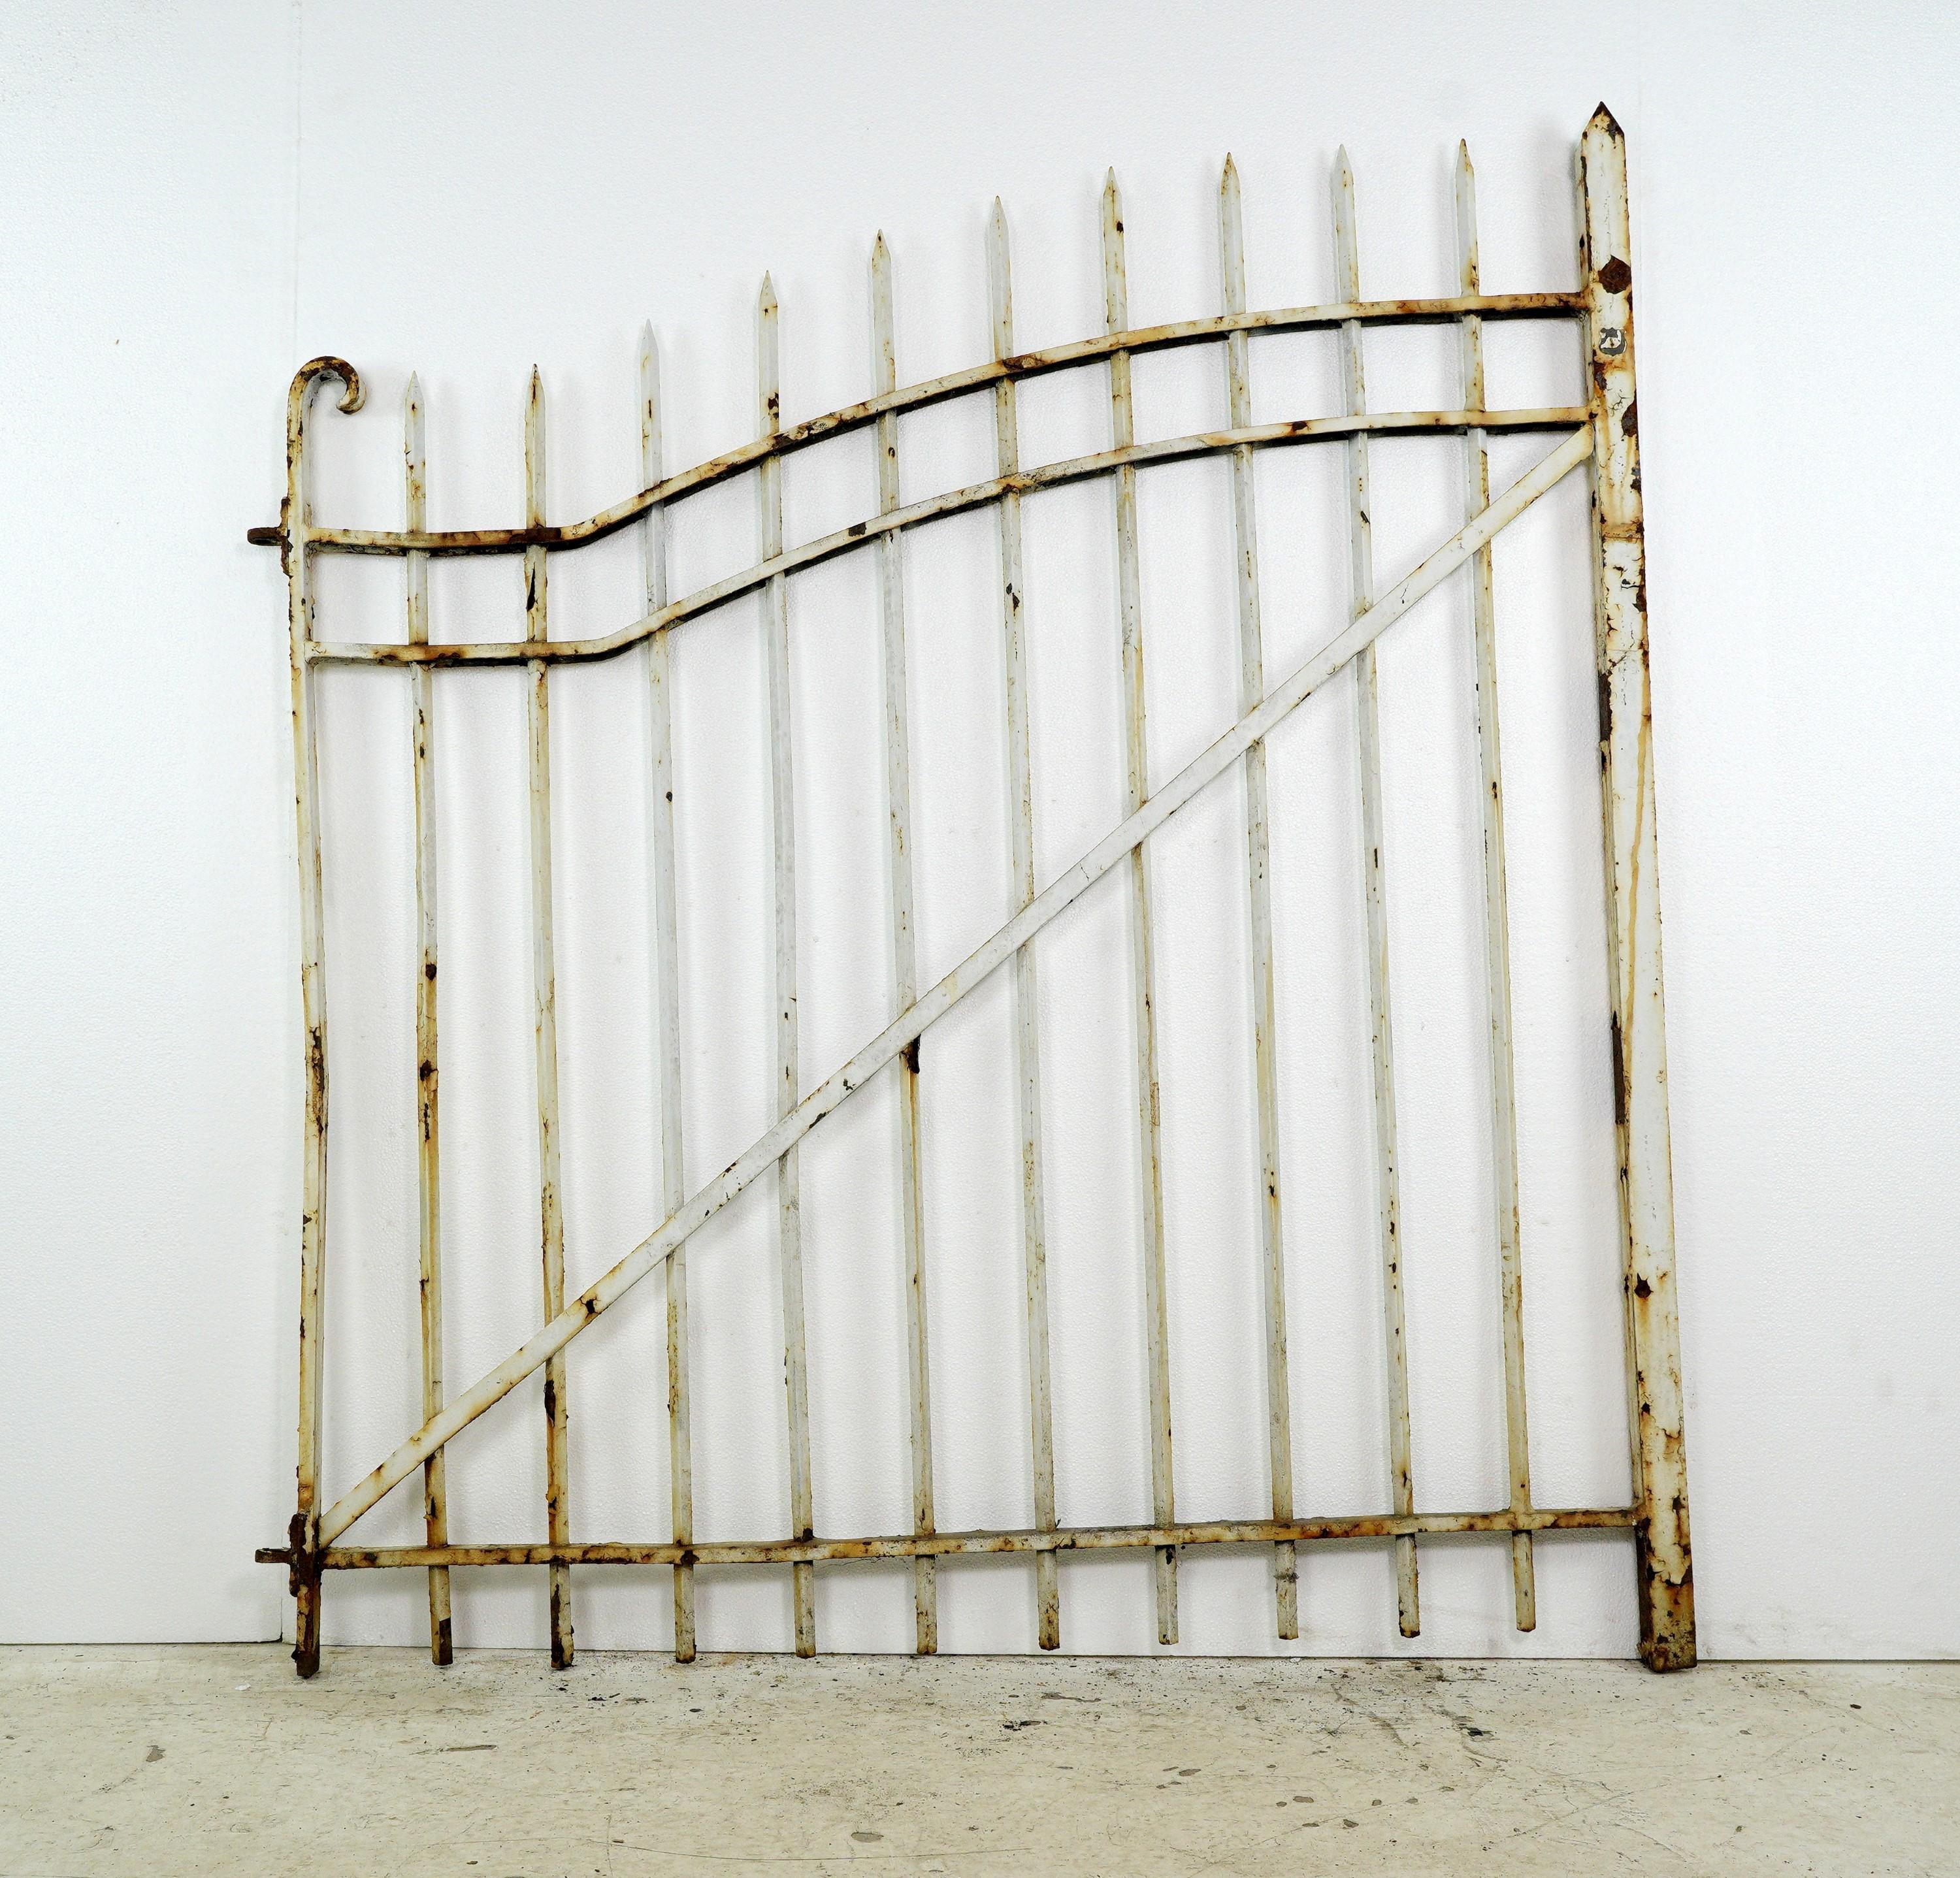 This is a great pair of heavy stock antique curved top wrought iron entry gates with curled end posts. Install them as an entrance to your property, providing privacy and security. Installation hardware will have to be sourced. They are in good